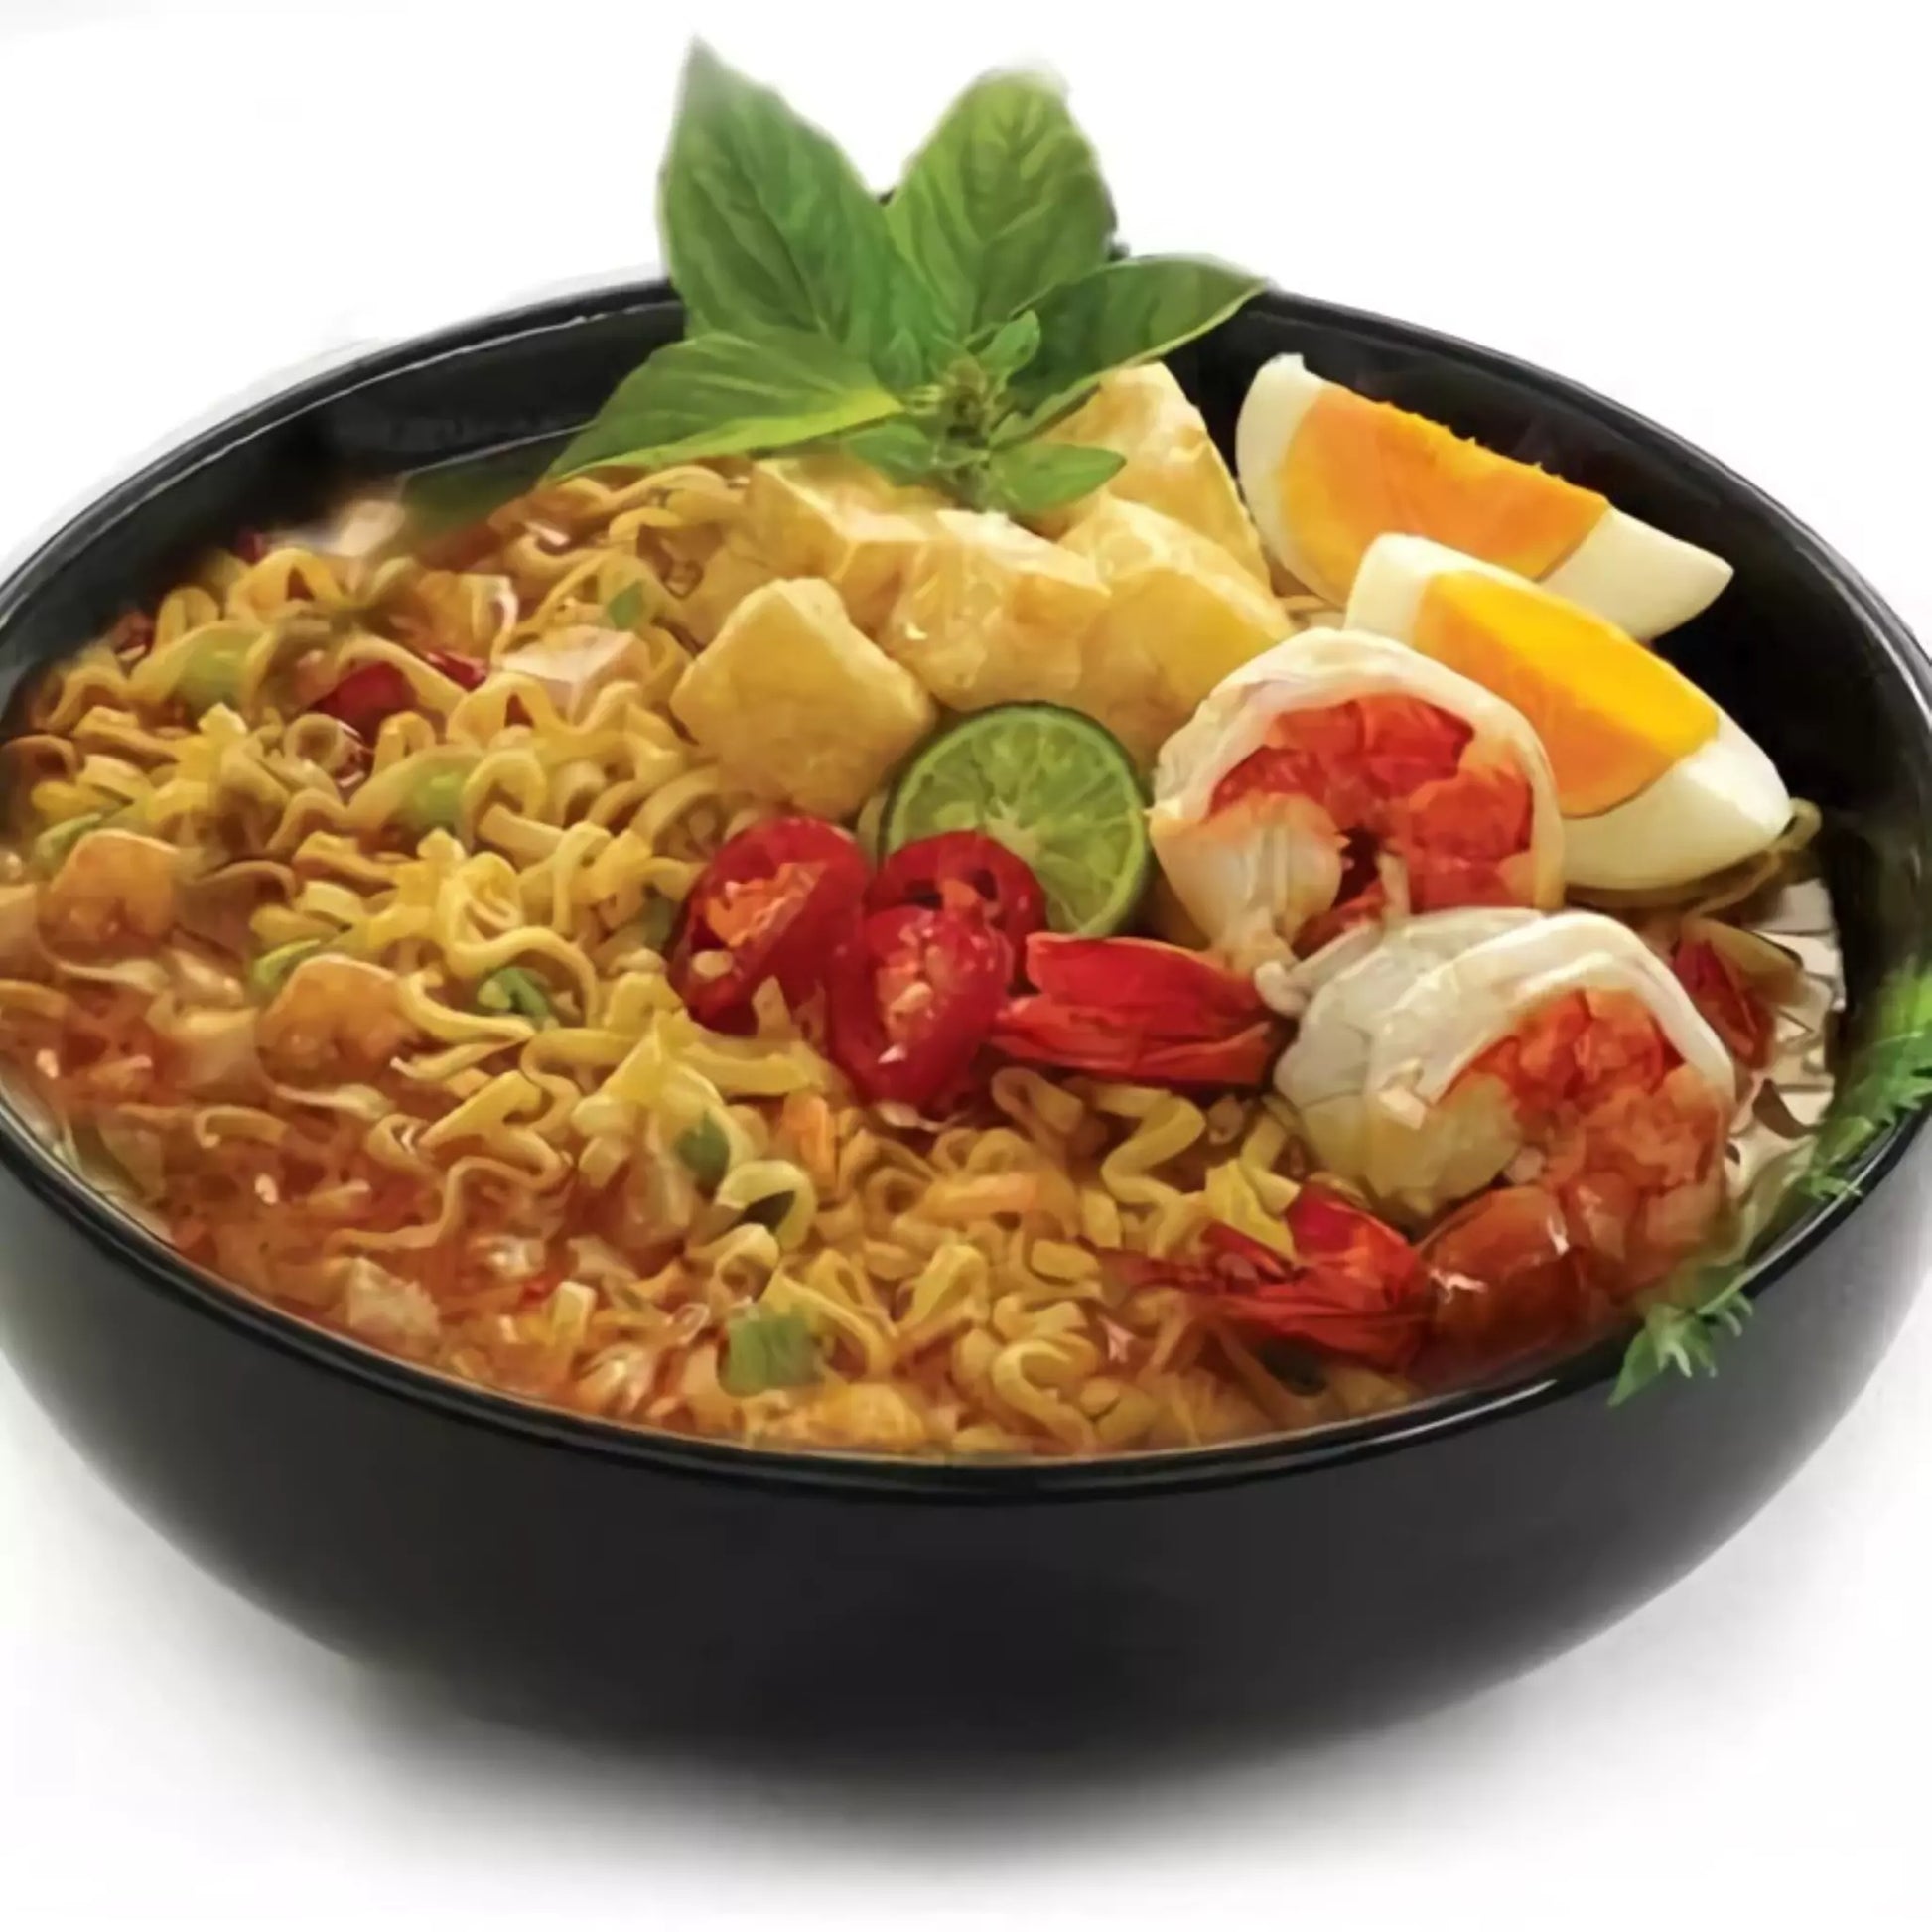 Indomie Curly Noodles with Grilled Chicken Flavor For Sale